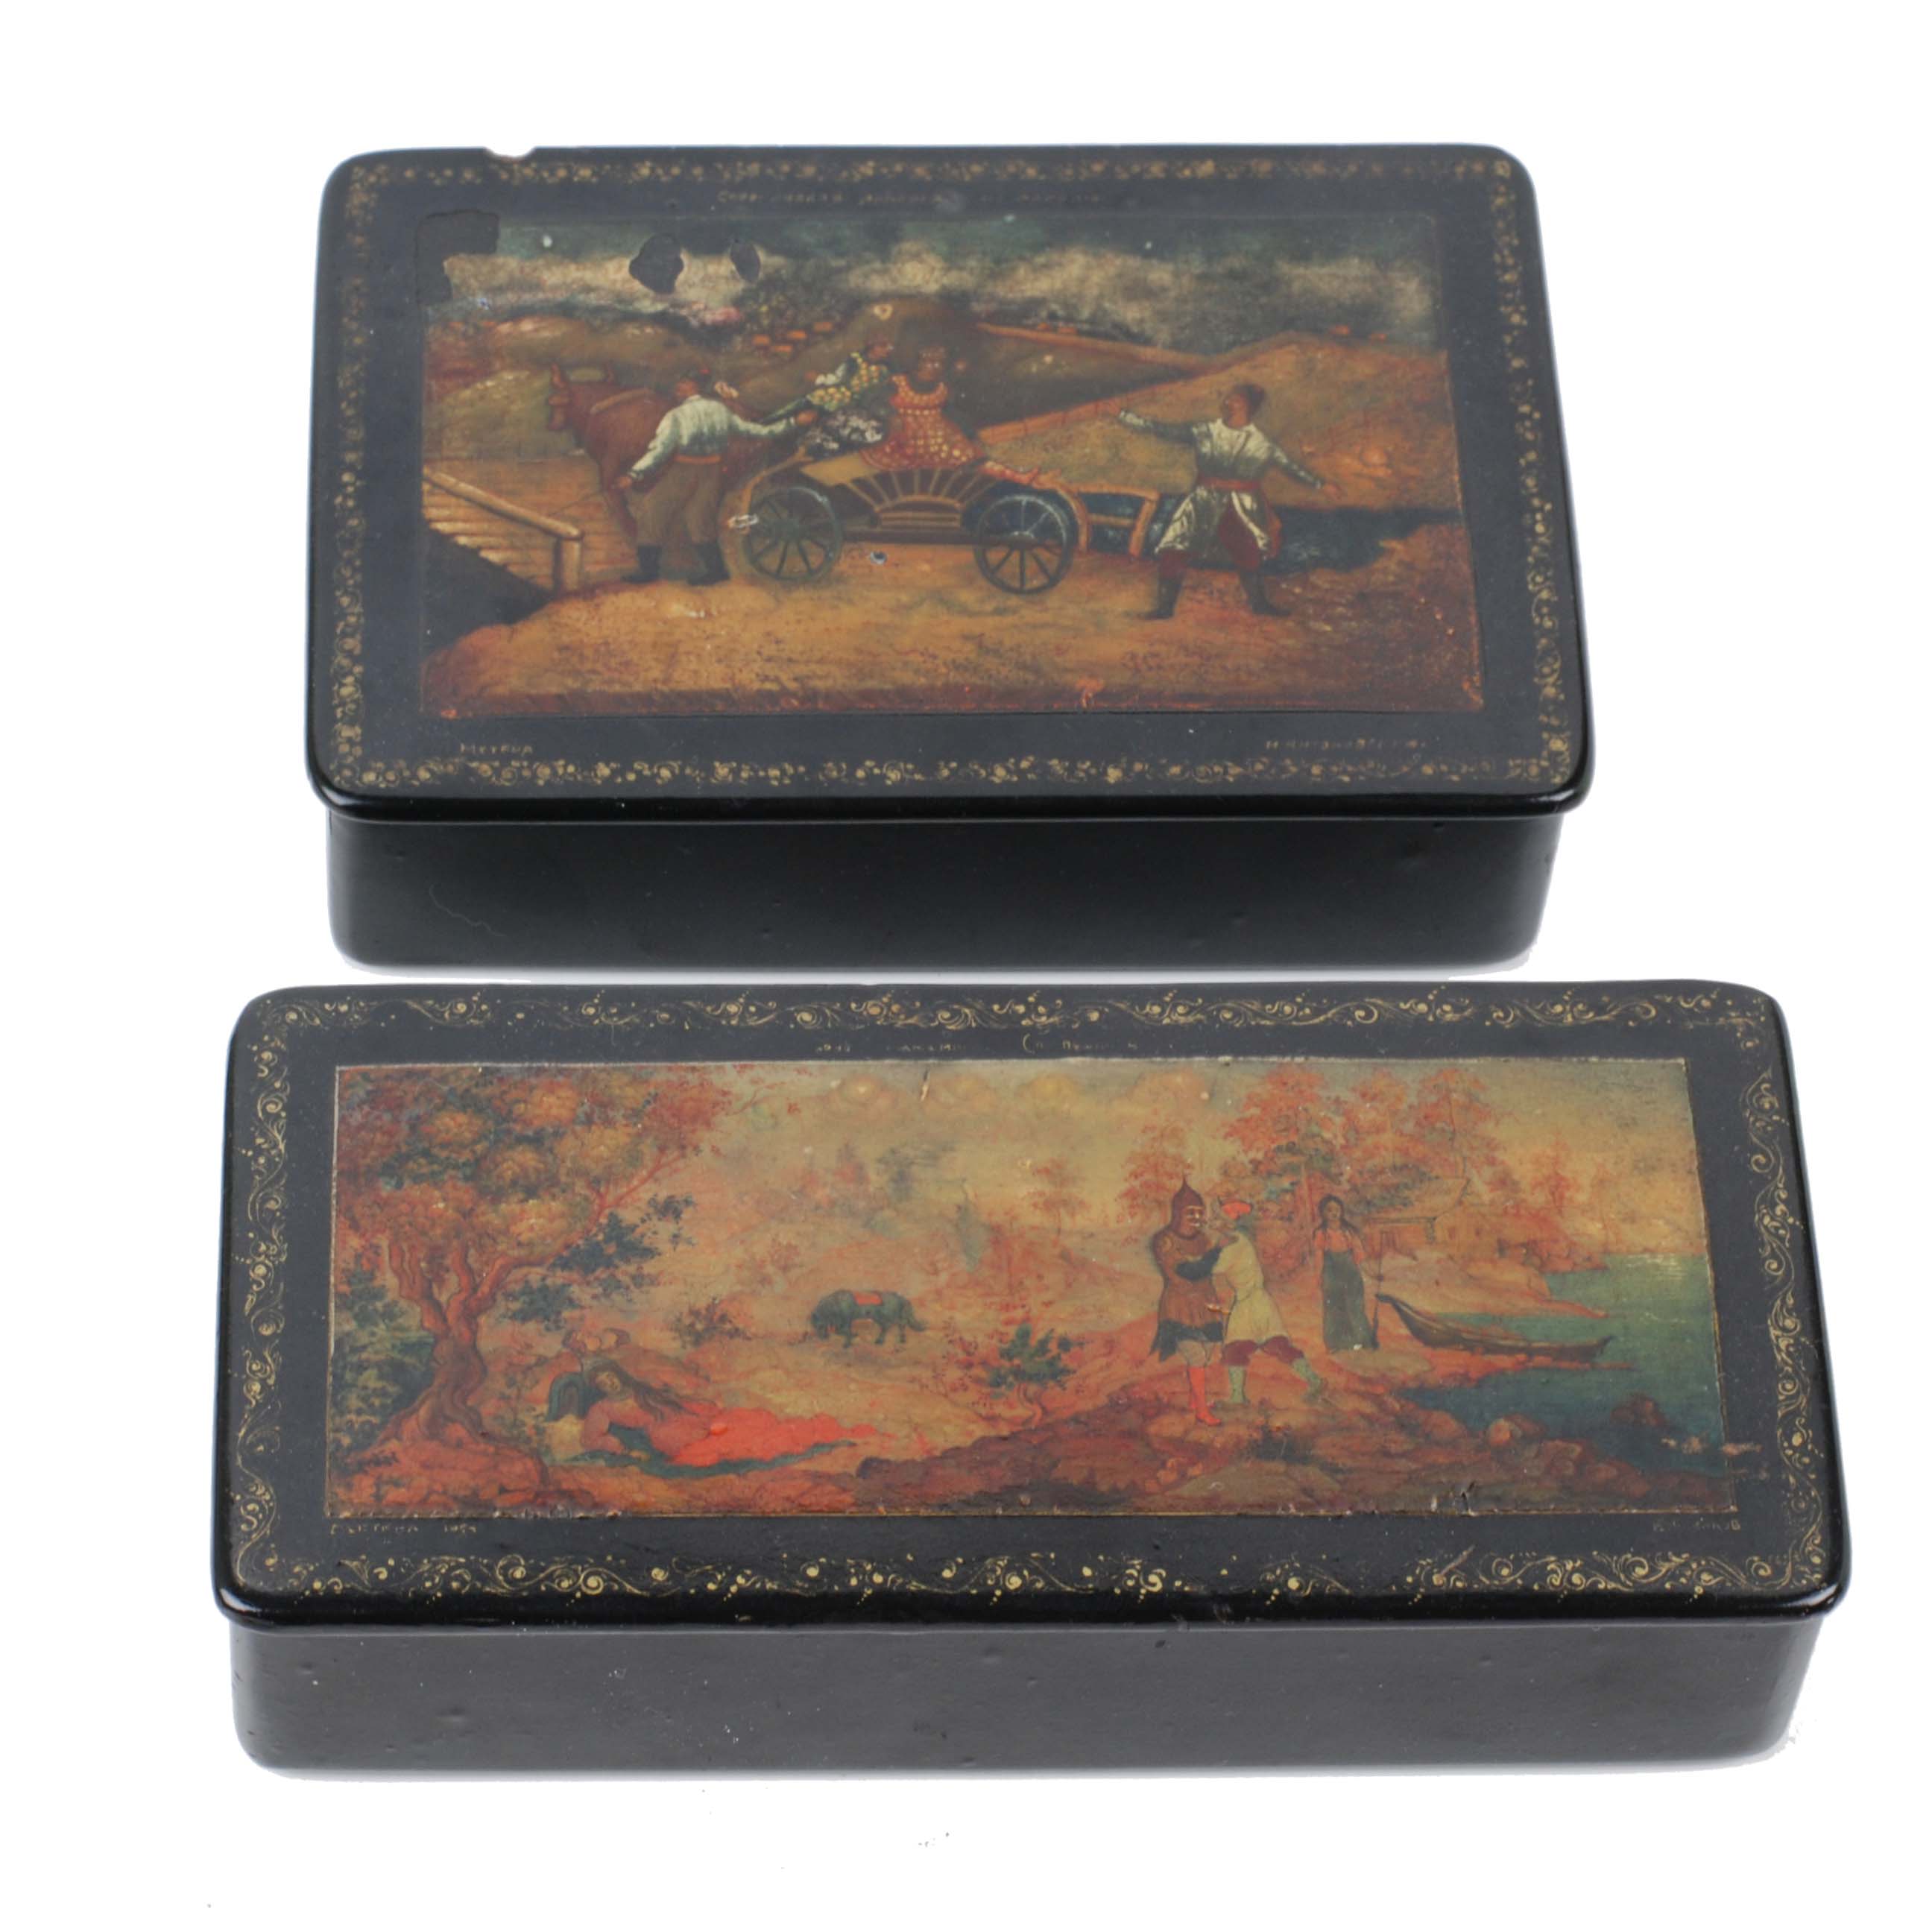 TWO RUSSIAN BOXES, 19TH CENTURY.